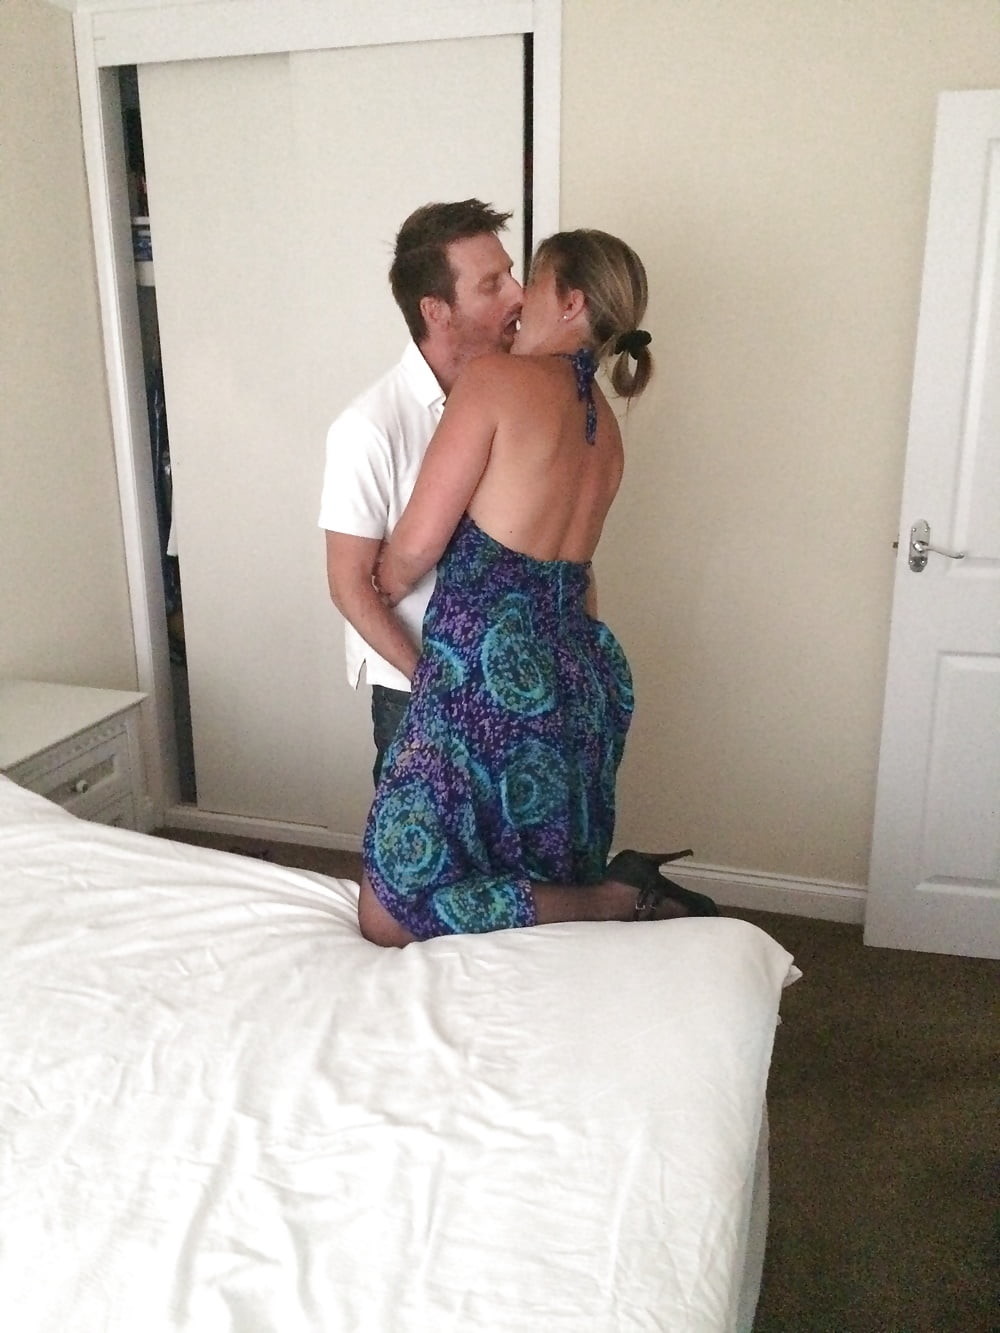 Watching Hotwife Kiss Another